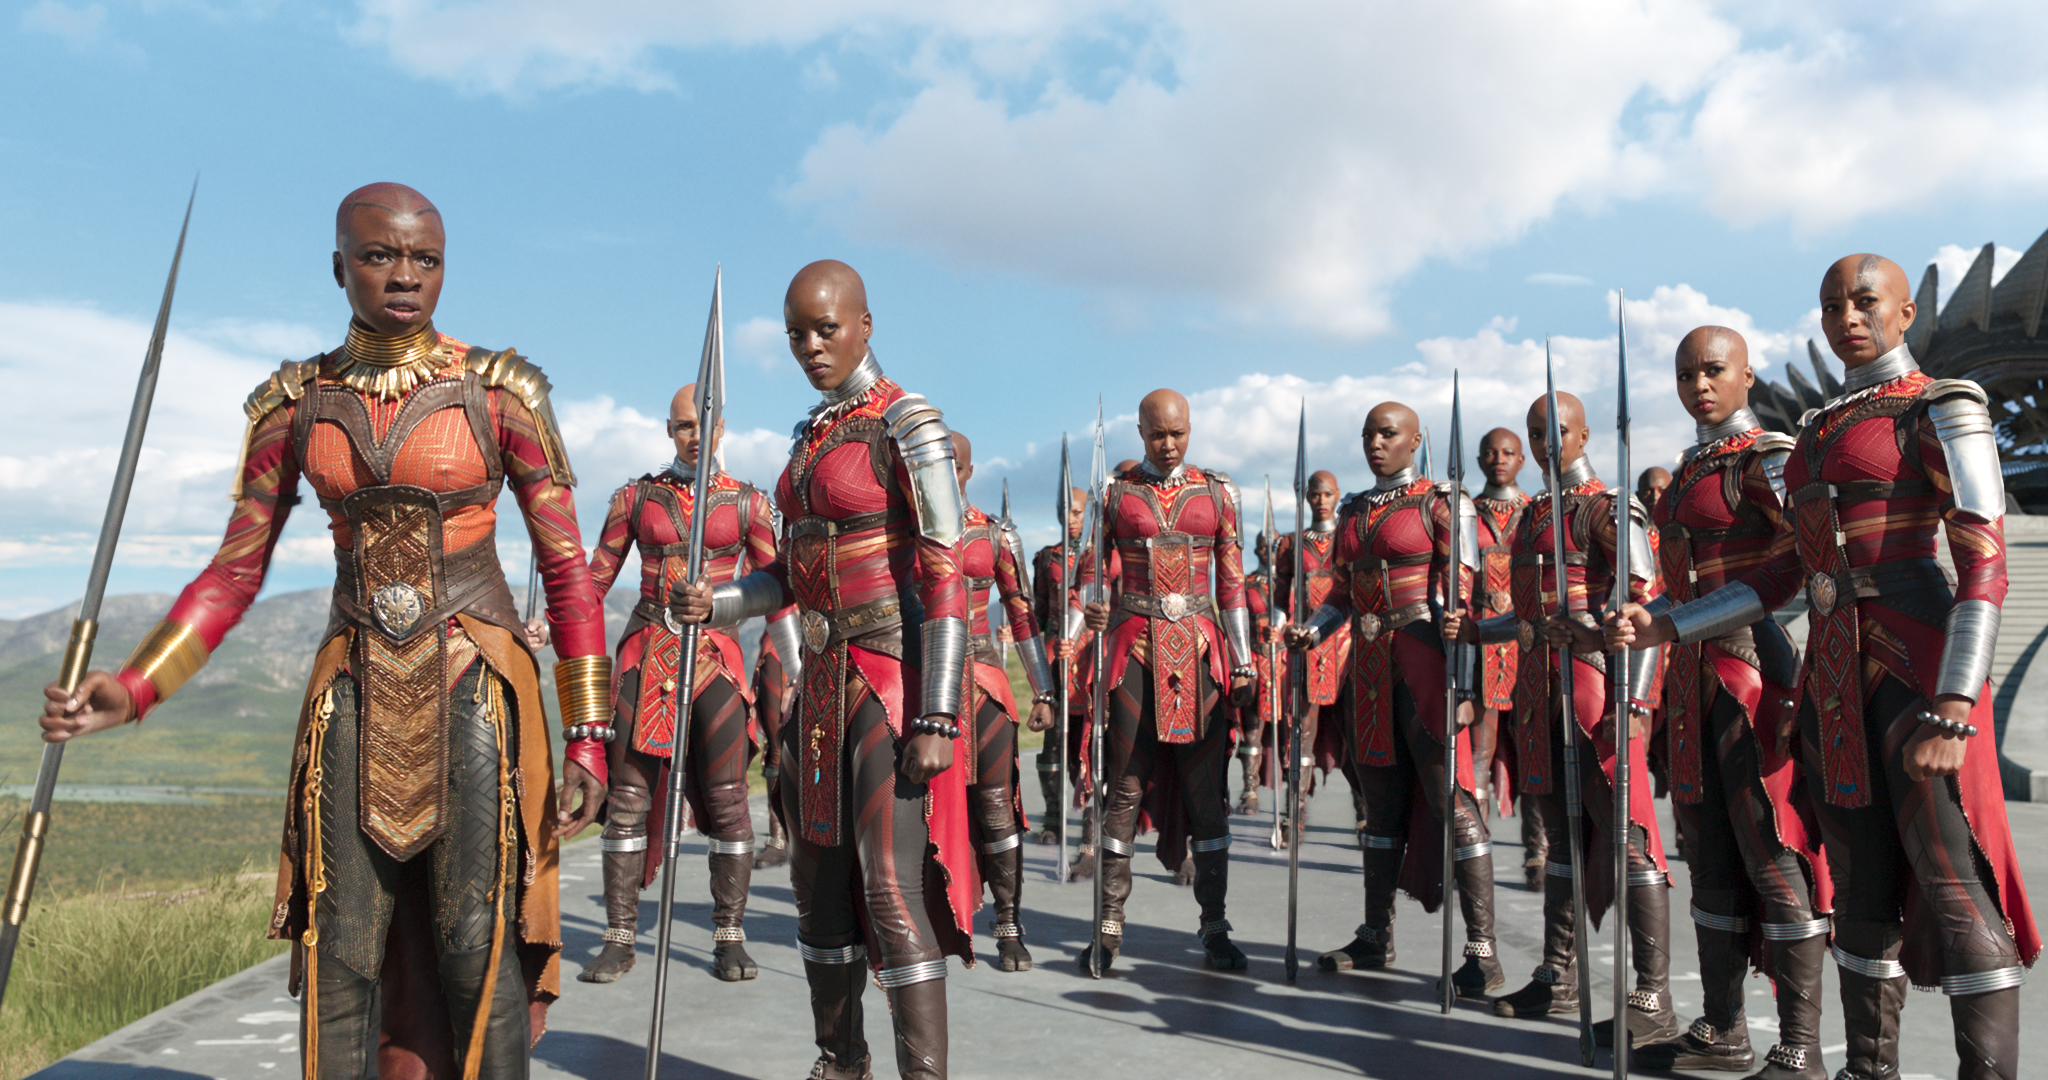 The Woman of Wakanda Were the real black superheroes of Black Panther